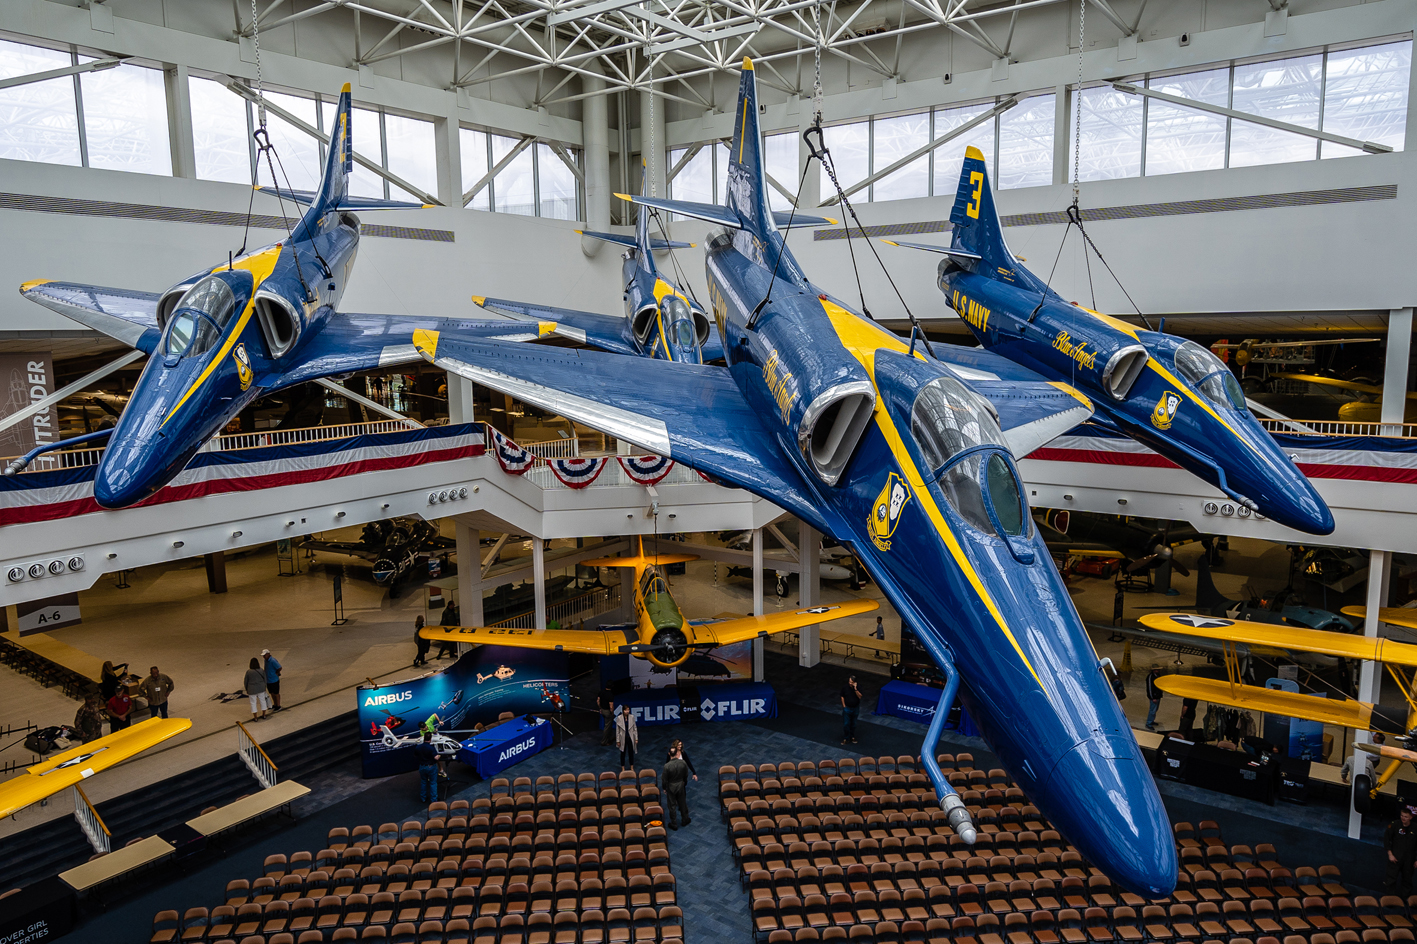 Blue Angels aircraft displayed at the National Museum of Aviation at Pensacola, FL. Photo by Visit Florida. 